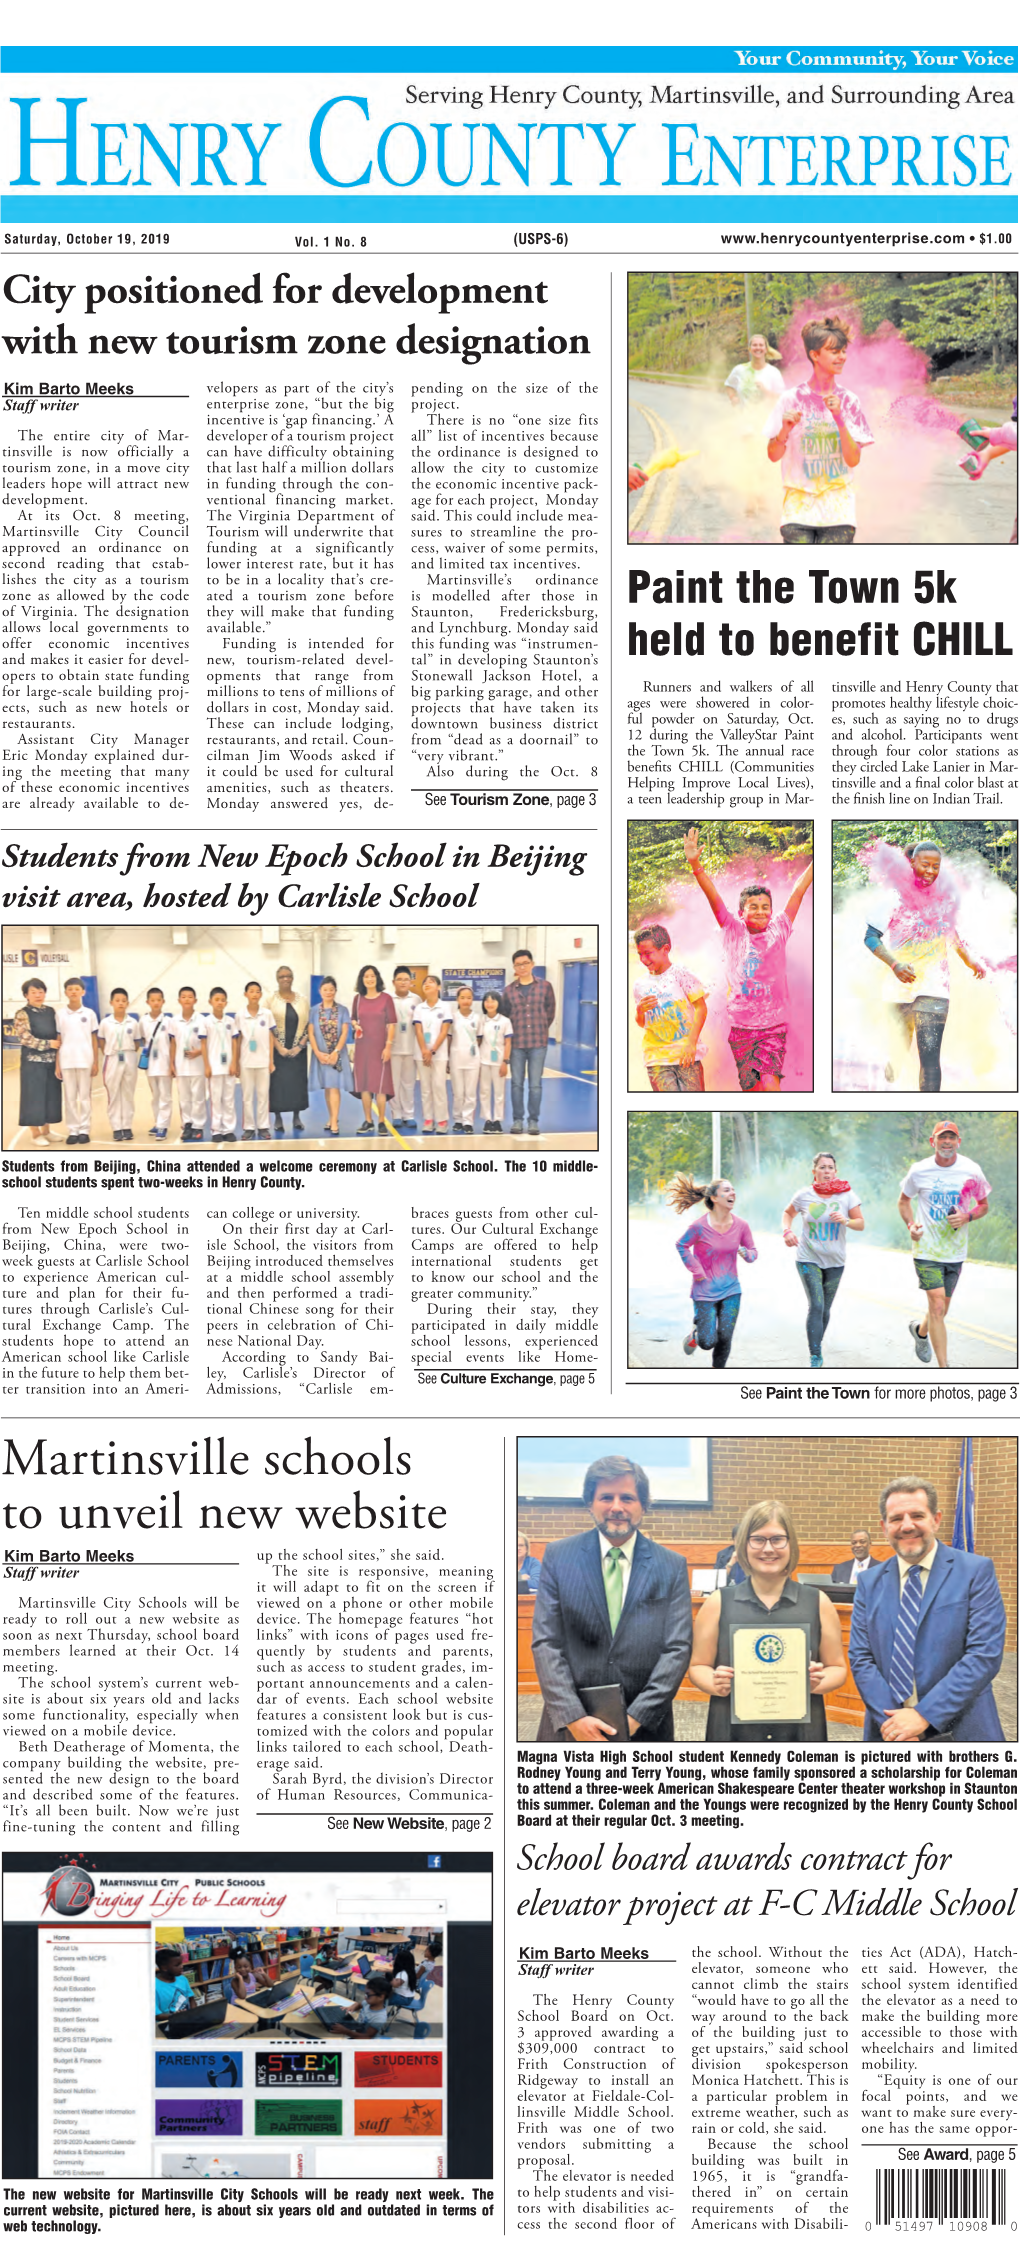 Martinsville Schools to Unveil New Website Kim Barto Meeks up the School Sites,” She Said